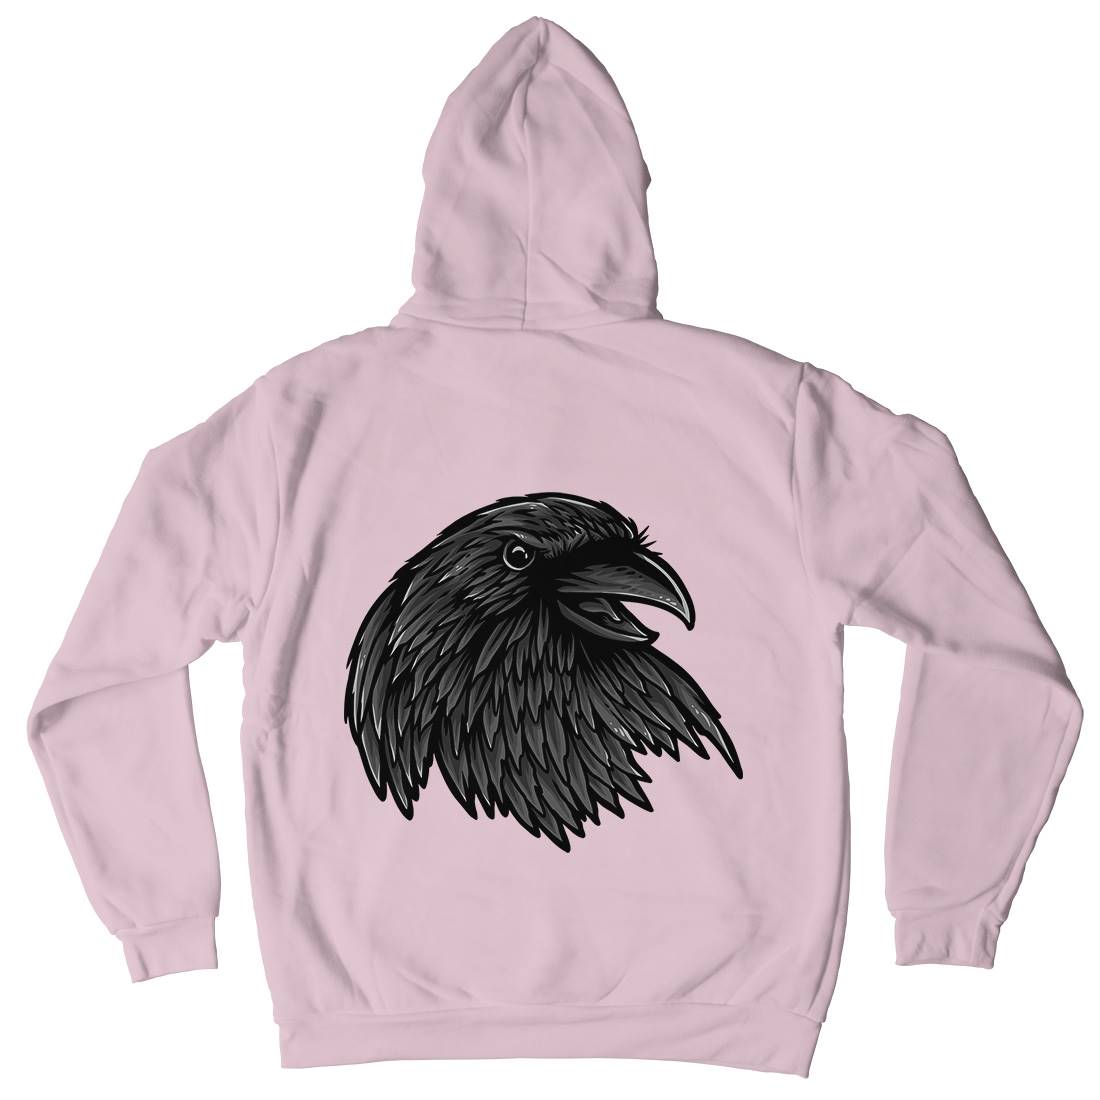 Rise Of The Raven Kids Crew Neck Hoodie Horror A462